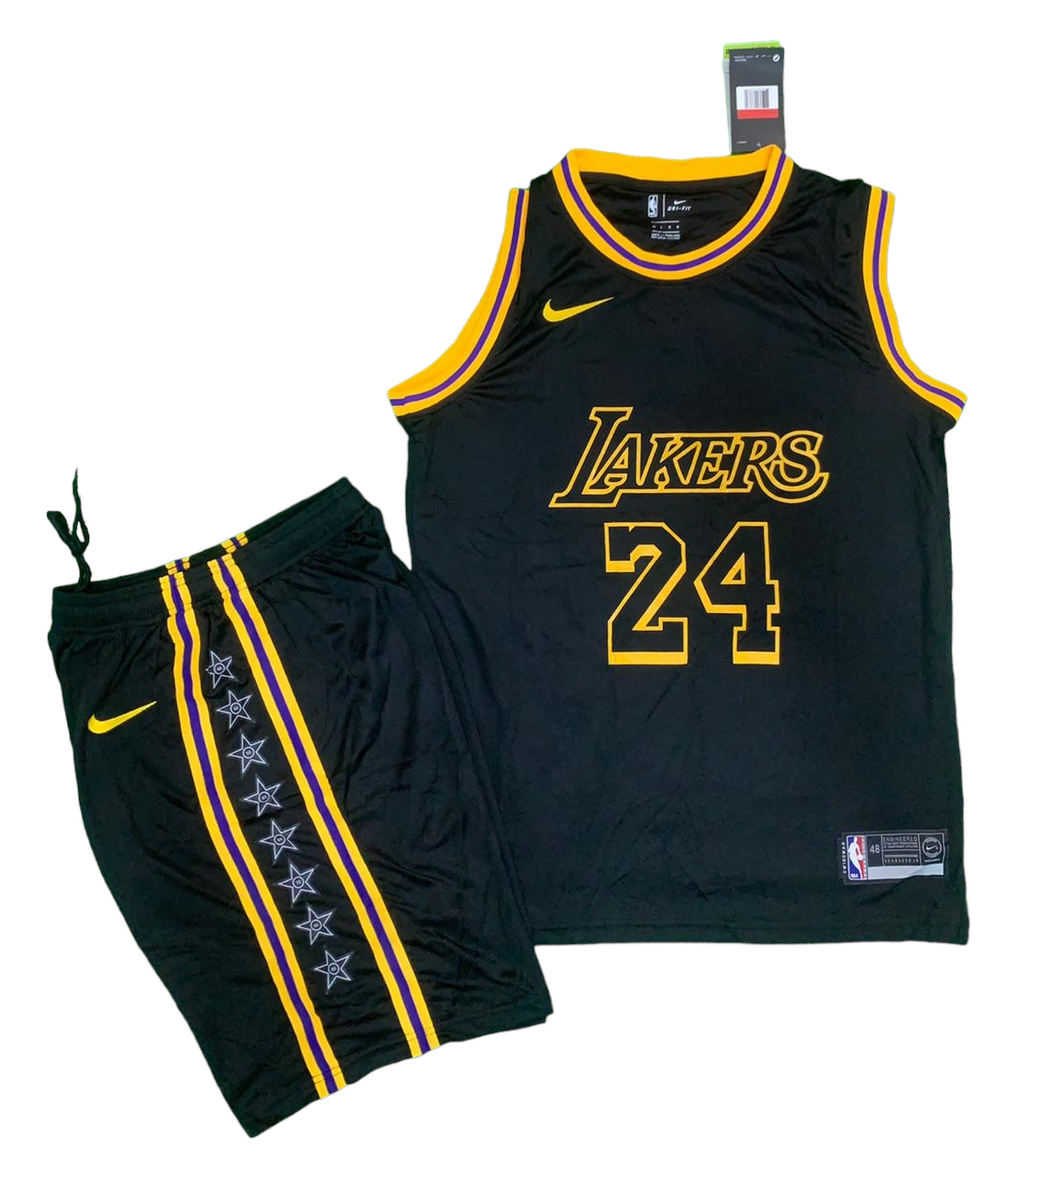 lakers jersey black panther